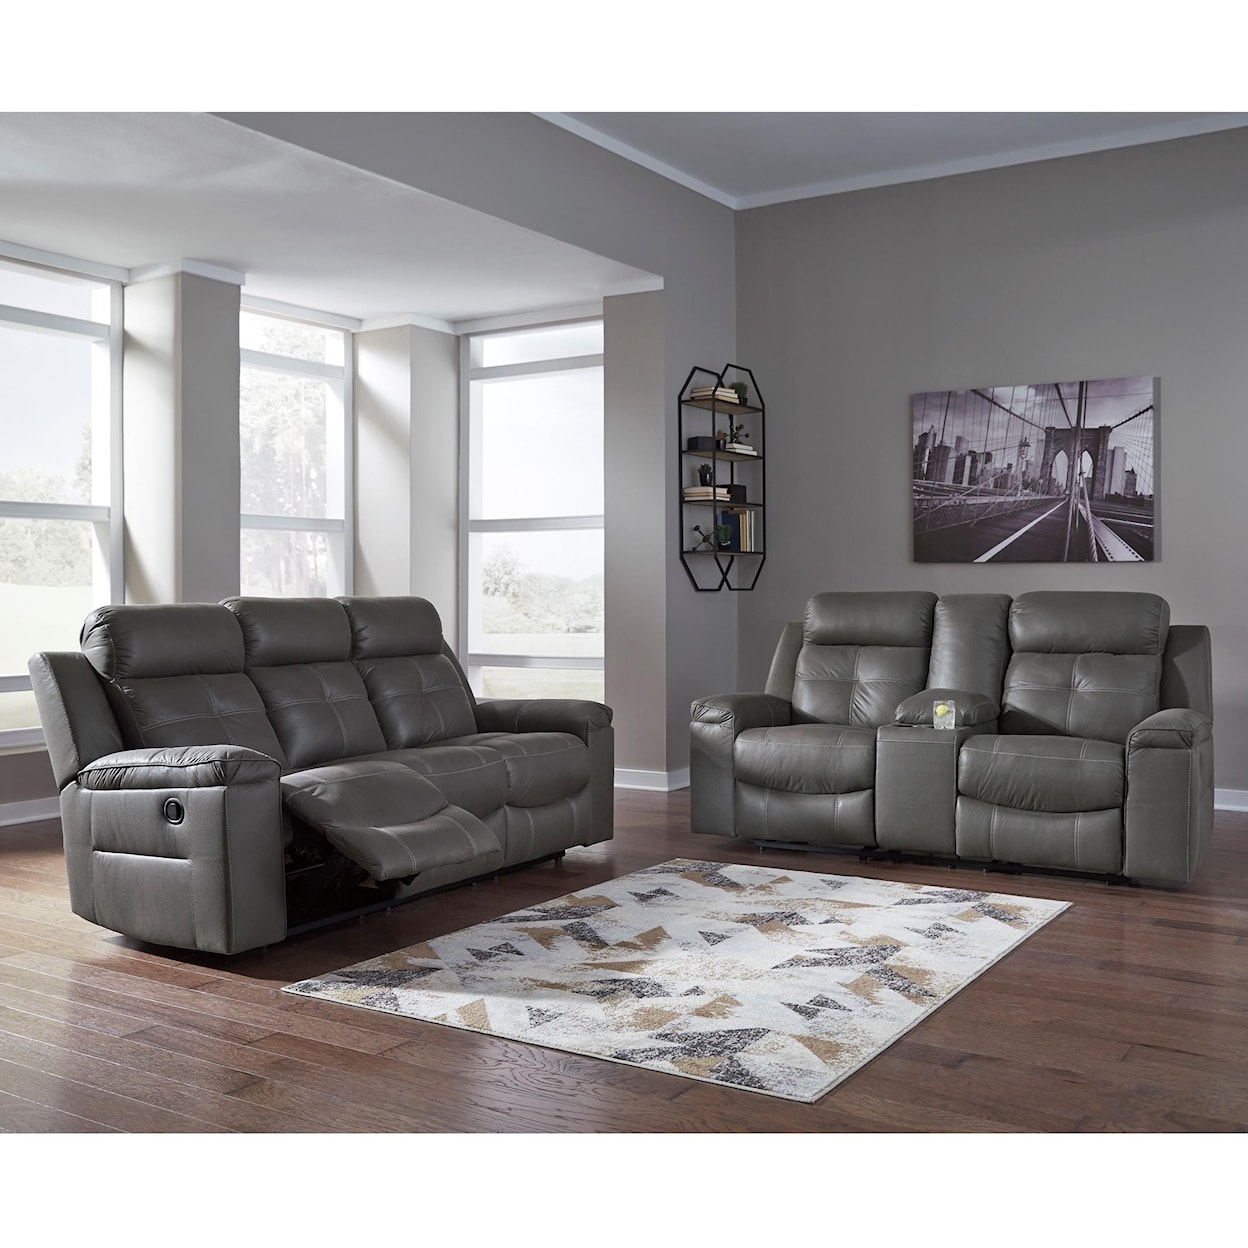 Signature Design by Ashley Furniture Jesolo Reclining Living Room Group